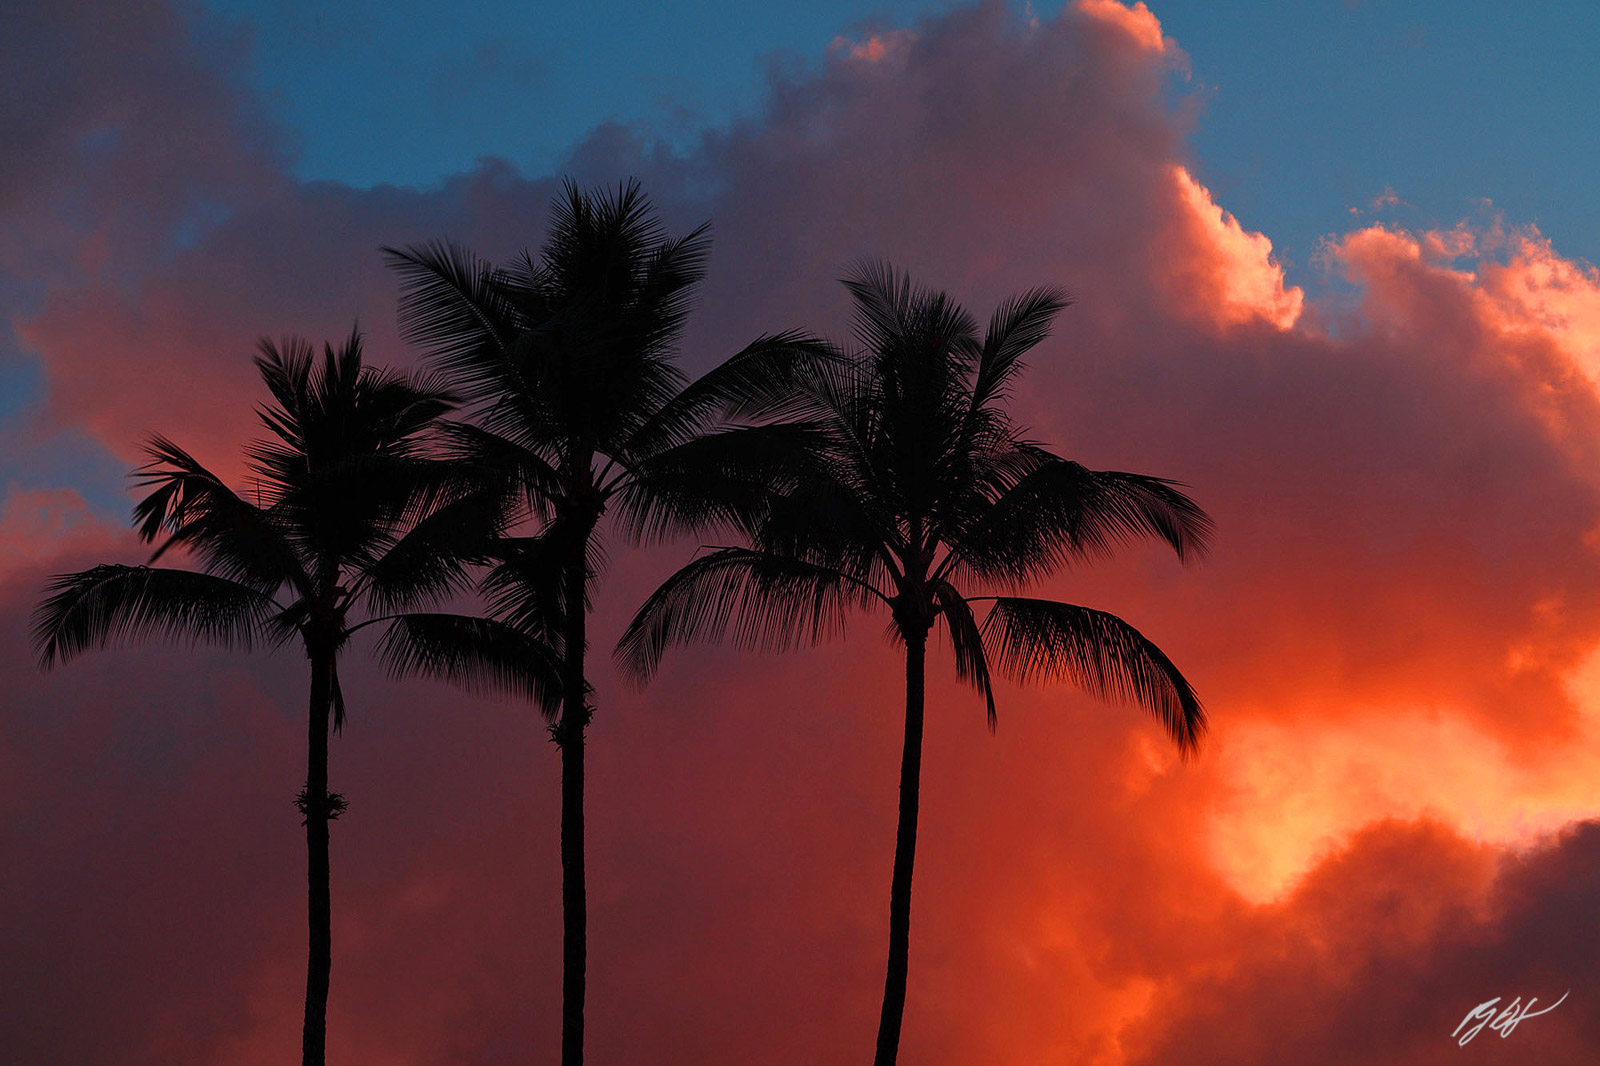 Palm trees at Sunrise from the Big Island of Hawaii